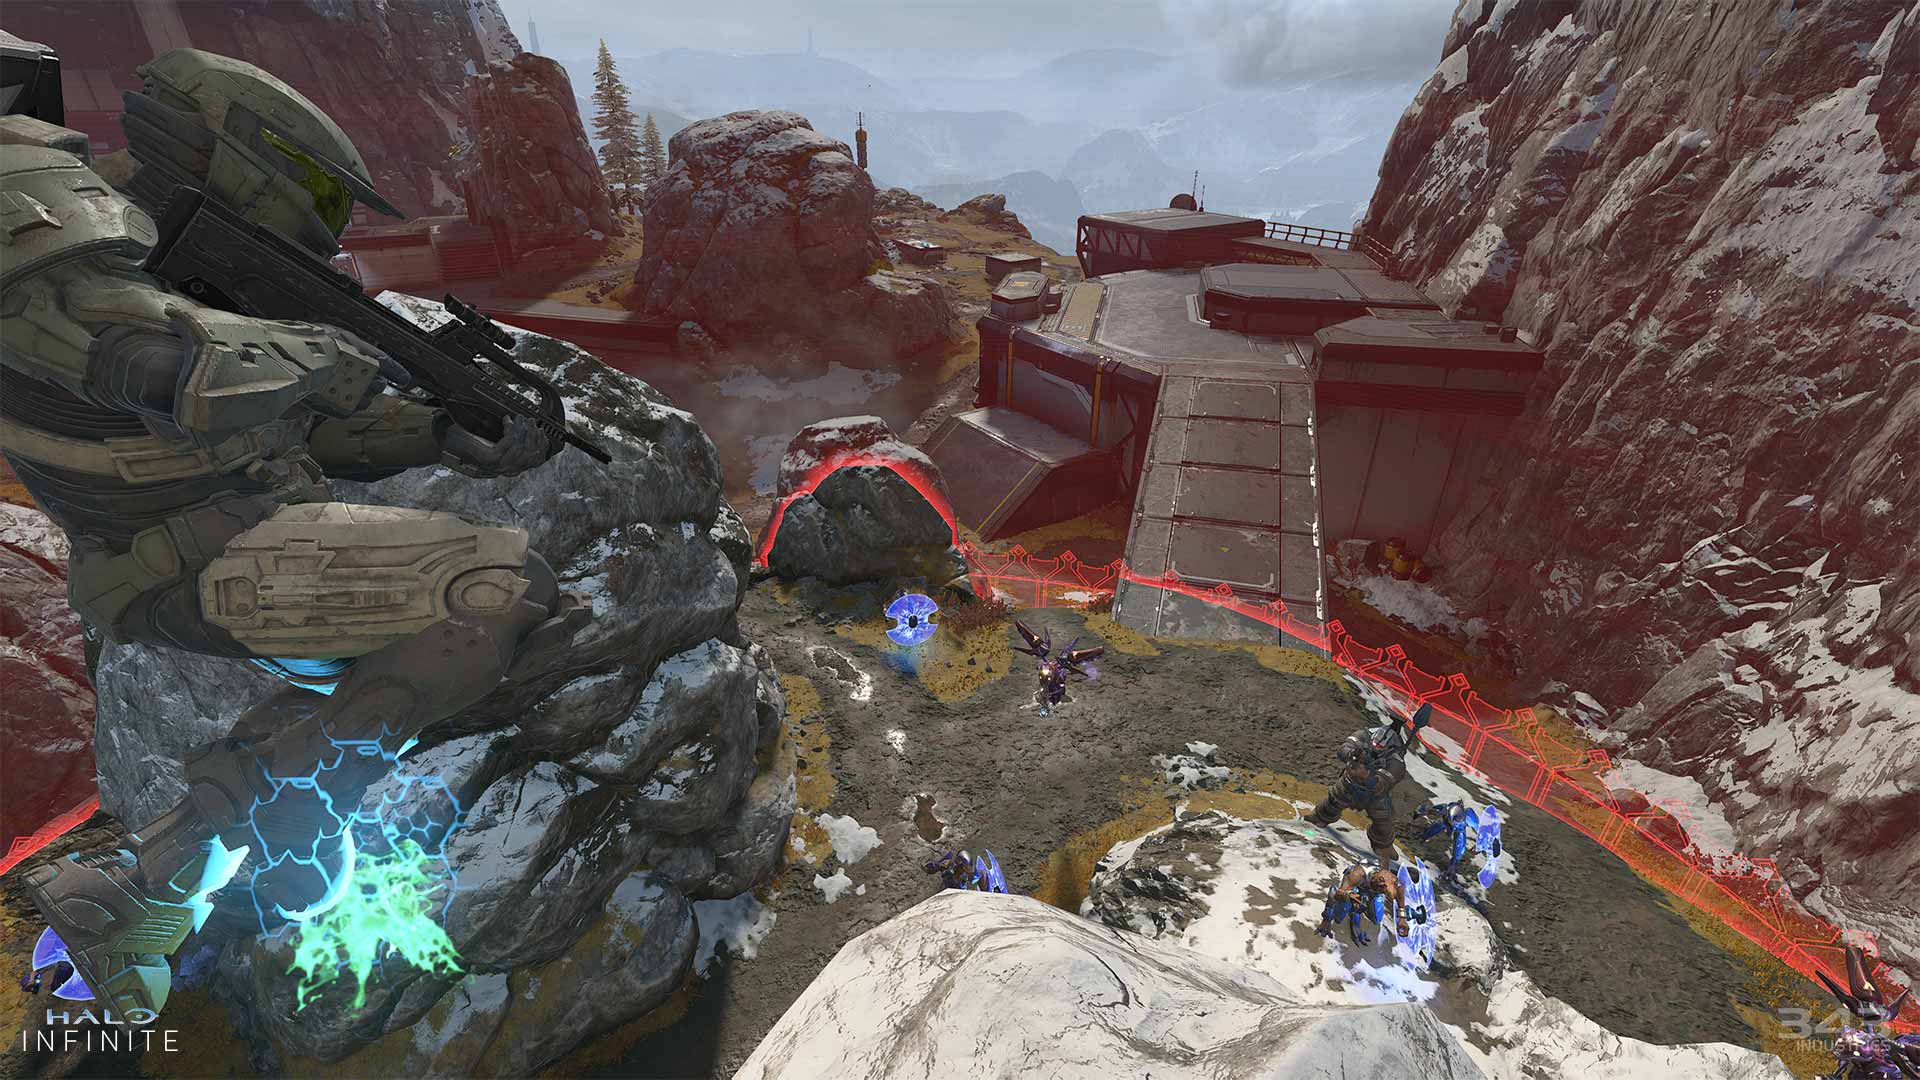 Cliffhanger for Firefight: King of the Hill in Halo Infinite